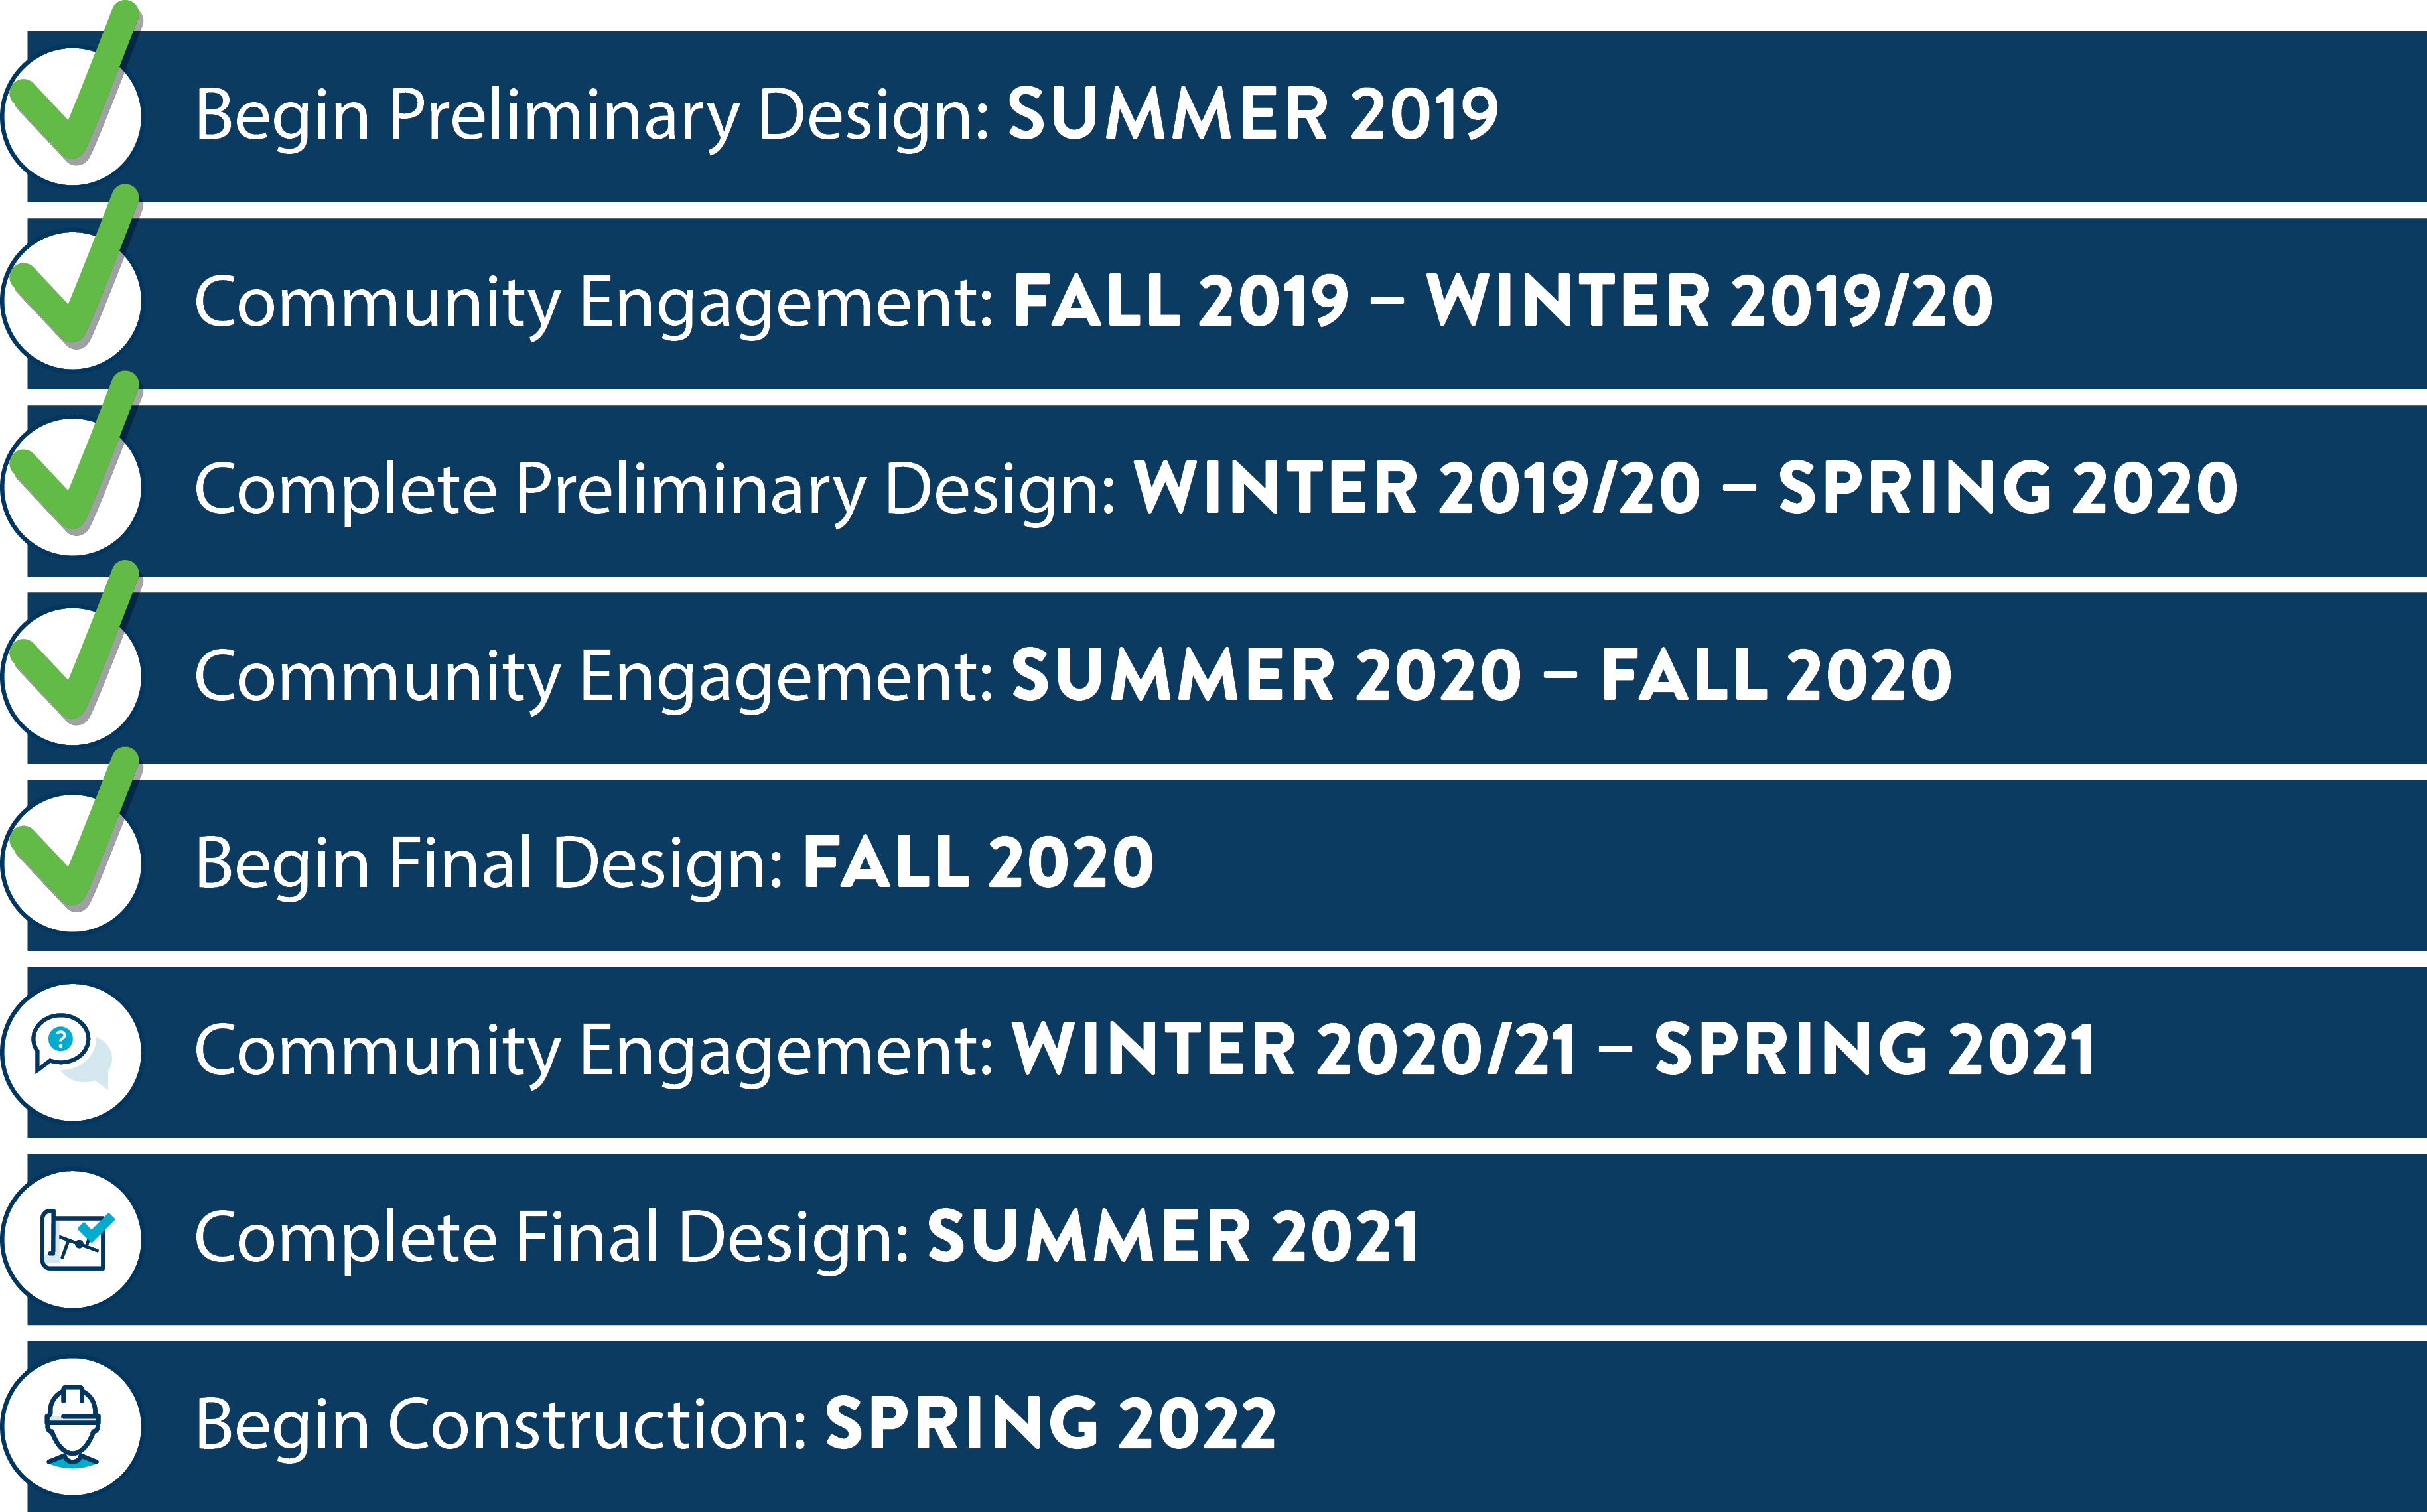 Begin Preliminary Design Summer 2019. Community Engagement Fall 2019 to Winter 2019 to 2020. Complete Preliminary Design Winter 2019 and 2020 to Spring 2020. Community Engagement Summer 2020 to Fall 2020. Begin Final Design Fall 2020. Community Engagement Winter 2020 and 2021 to Spring 2021. Complete Final Design Summer 2021. Begin Construction Spring 2022.